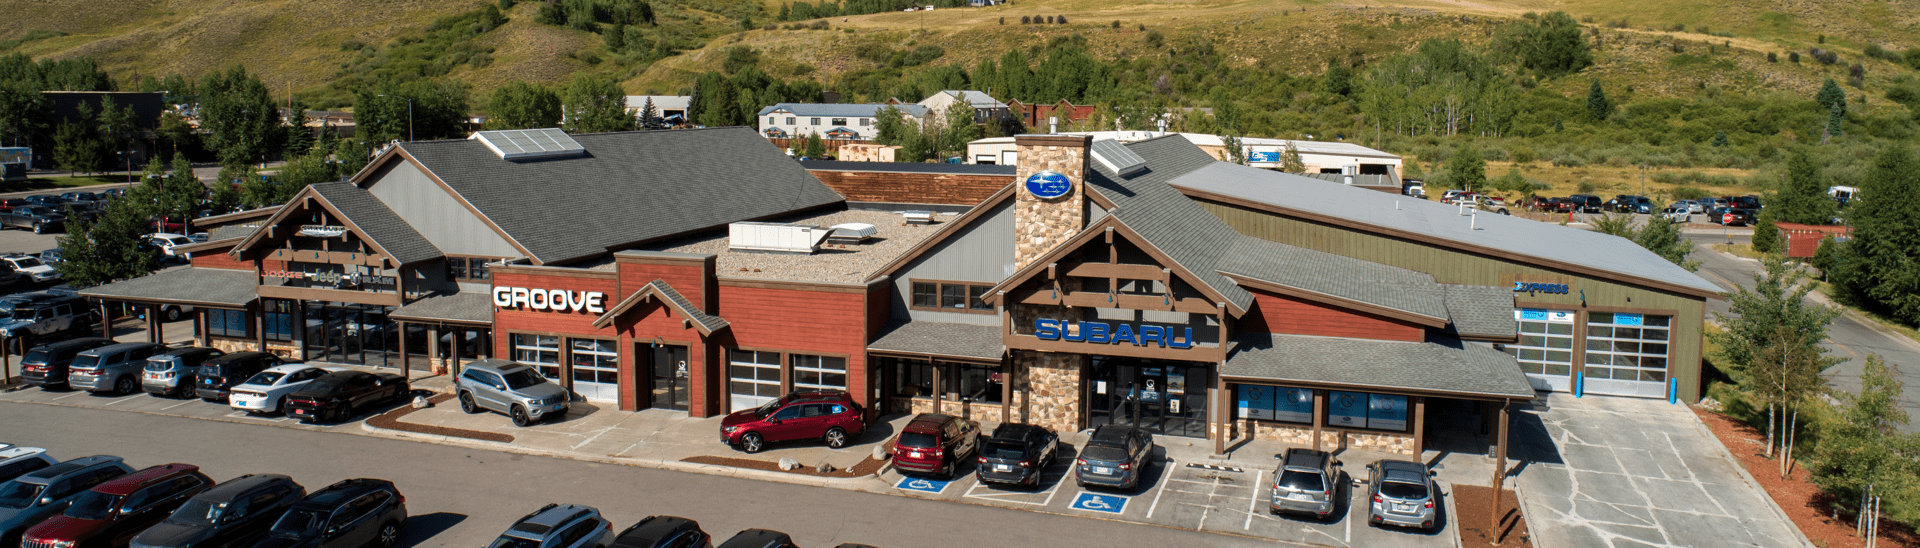 exterior view of Groove Subaru of Silverthorne